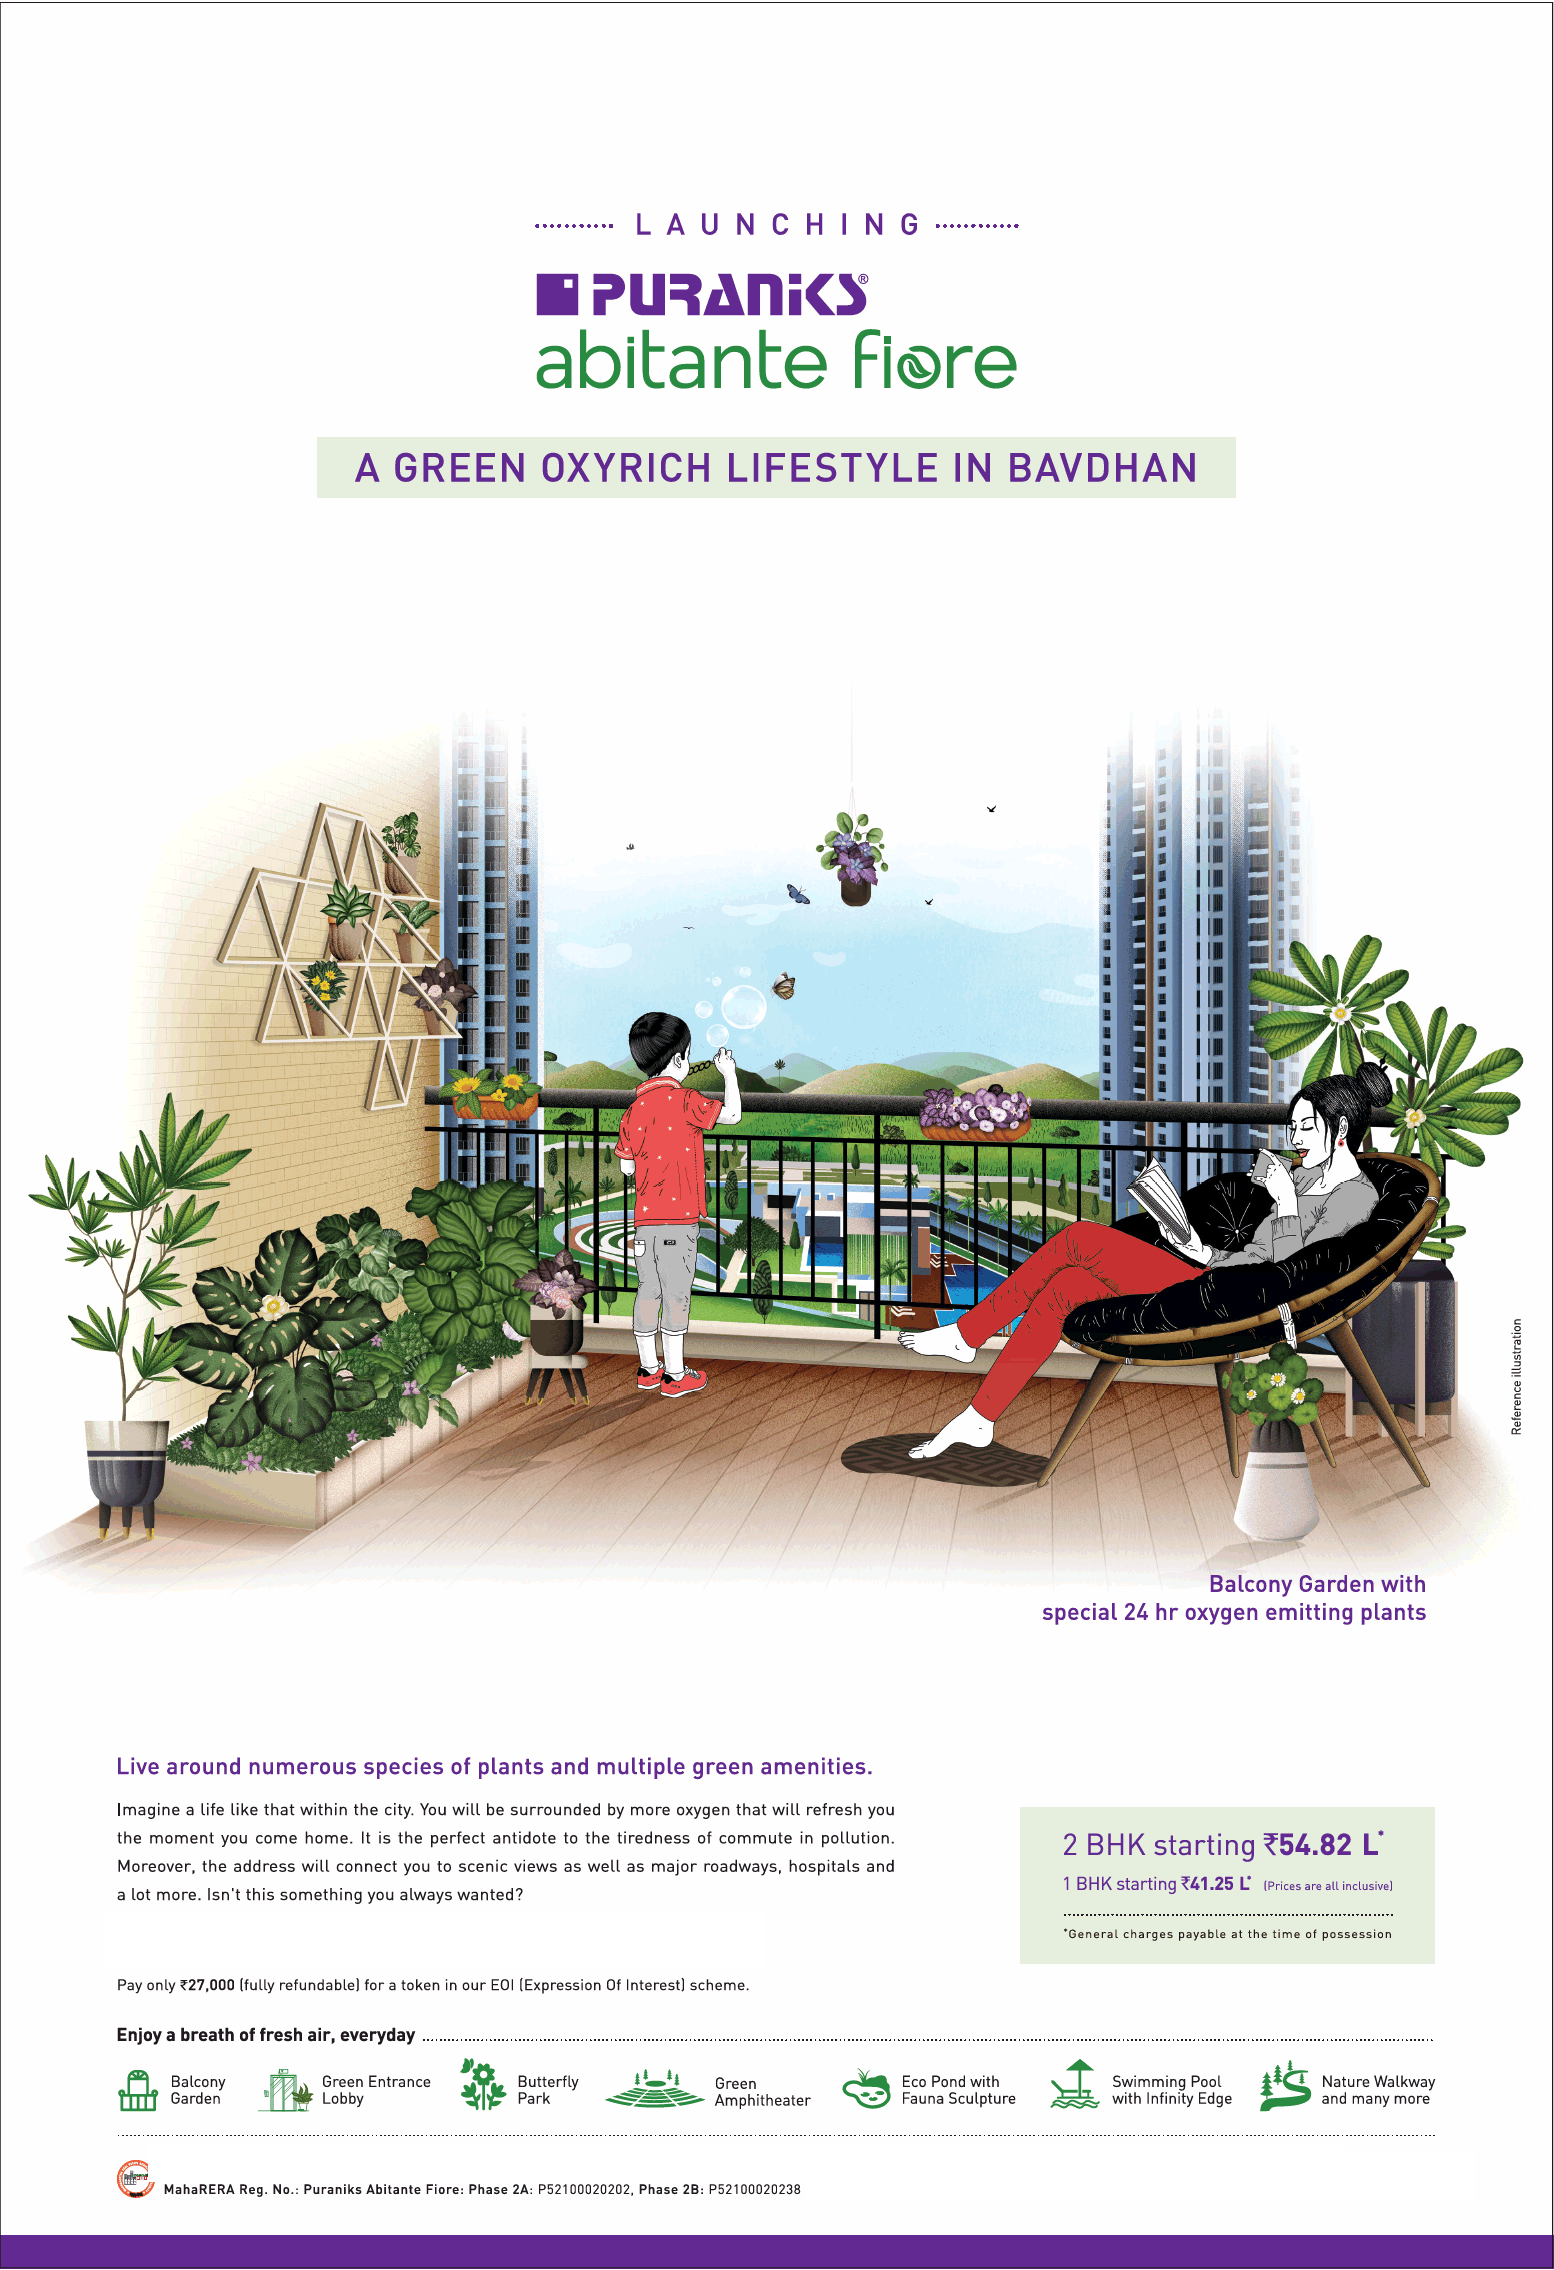 2 BHK starting Rs 54.82 lakh at Puraniks Abitante in Pune